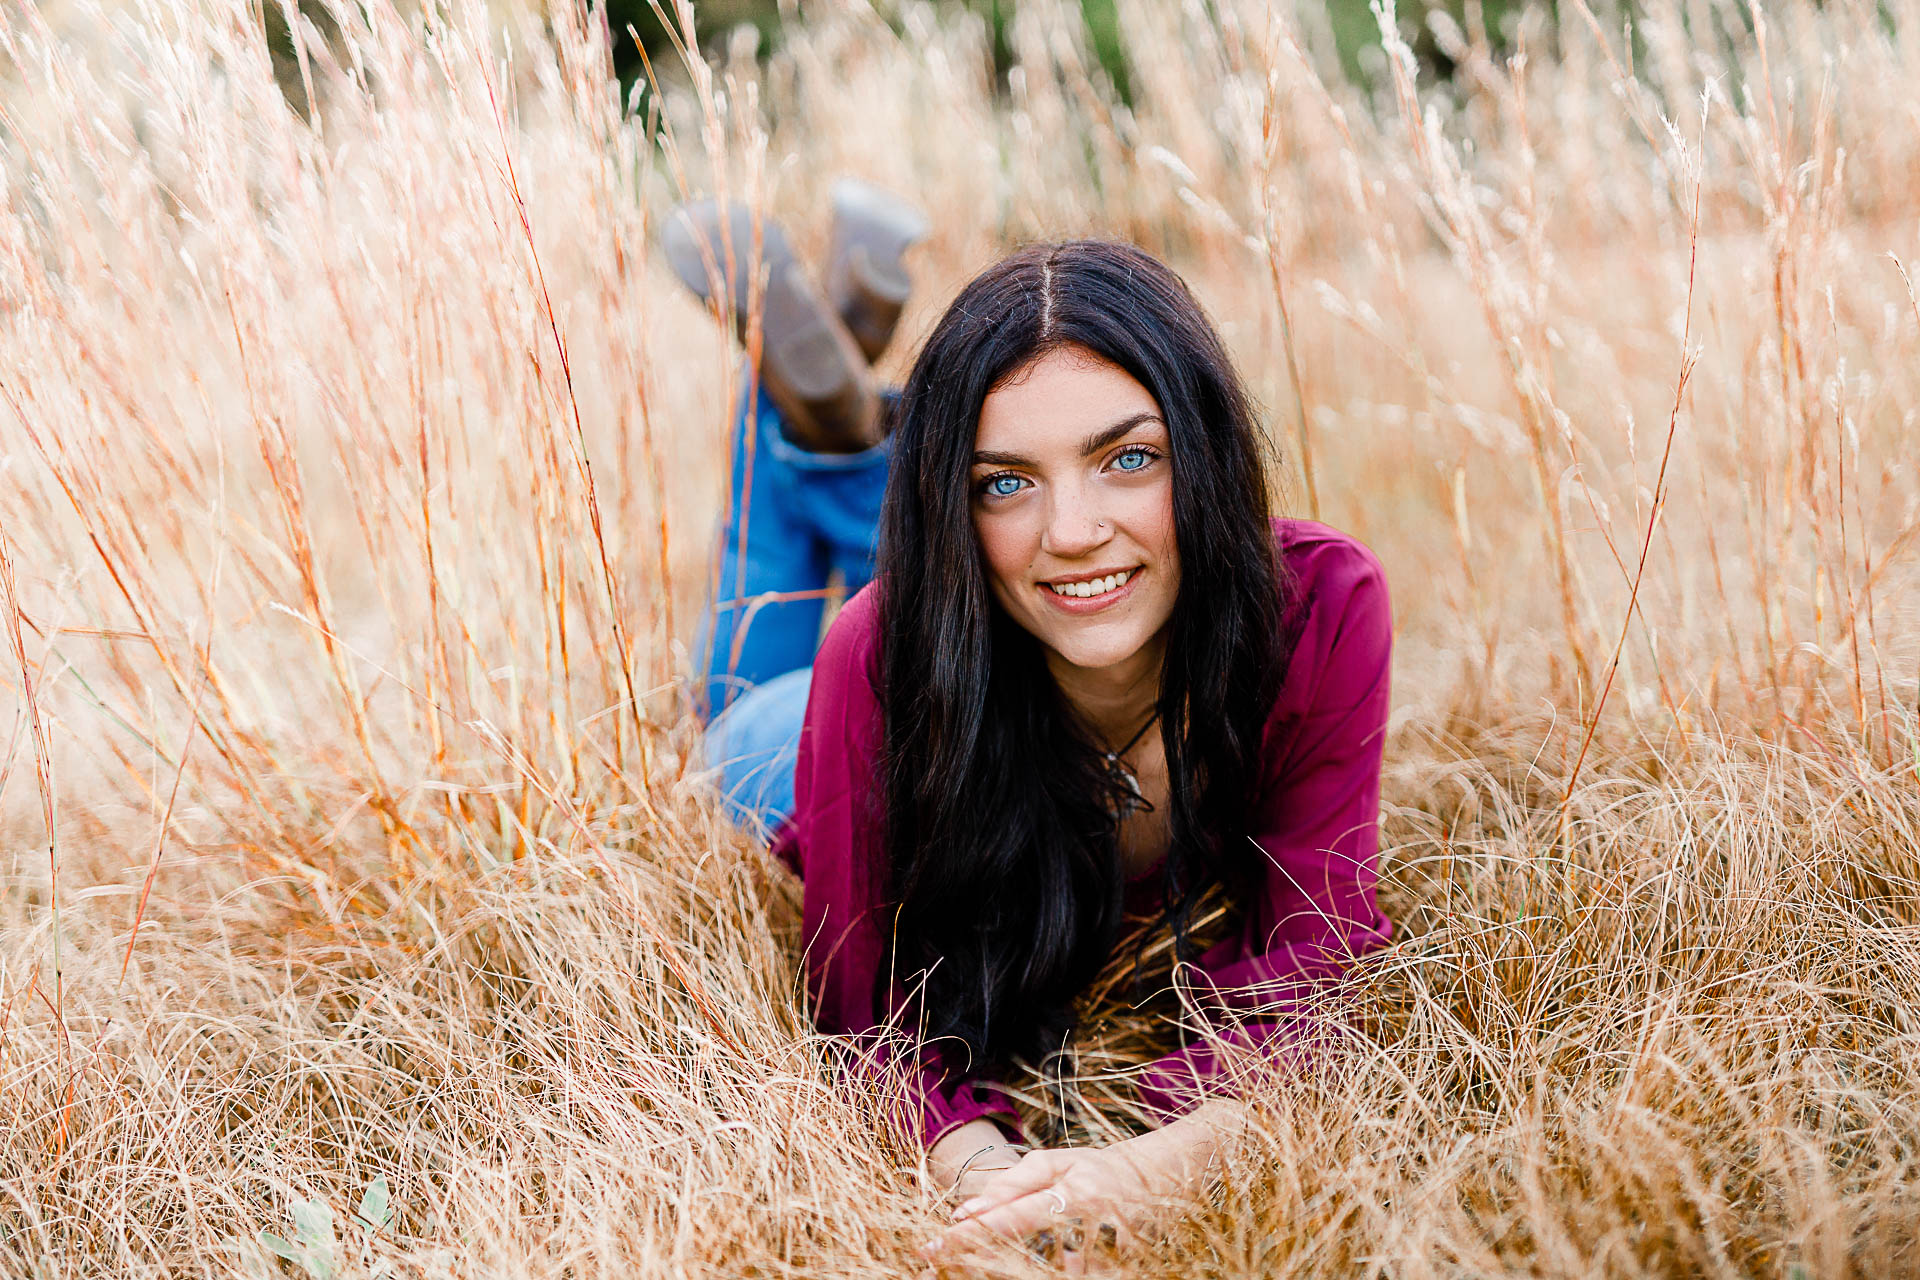 Photo by Duxbury senior photographer Christina Runnals | A high school senior girl with big blue eyes laying in a field smiling